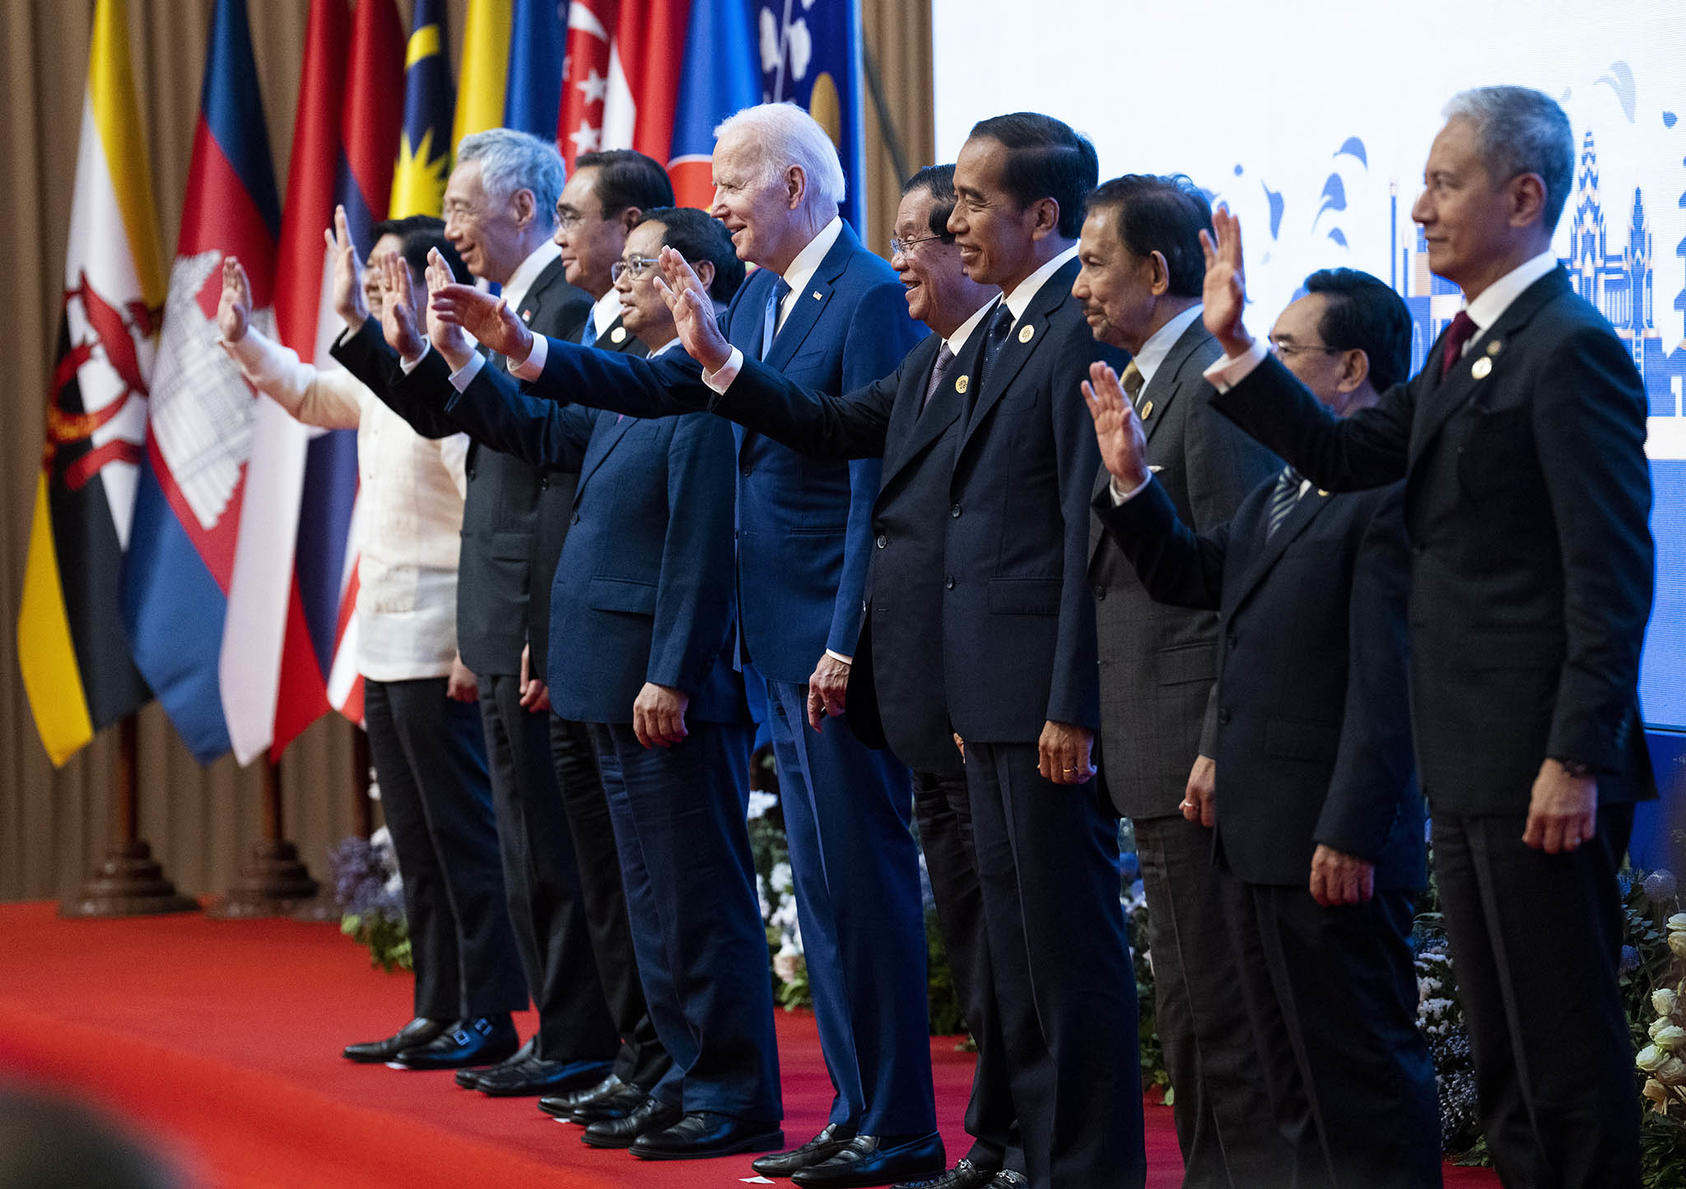 President Joe Biden poses for a photo with leaders from the Association of Southeast Asian Nations (ASEAN) at the East Asia Summit in Phnom Penh, Cambodia, on Saturday, Nov. 12, 2022. (Doug Mills/The New York Times)